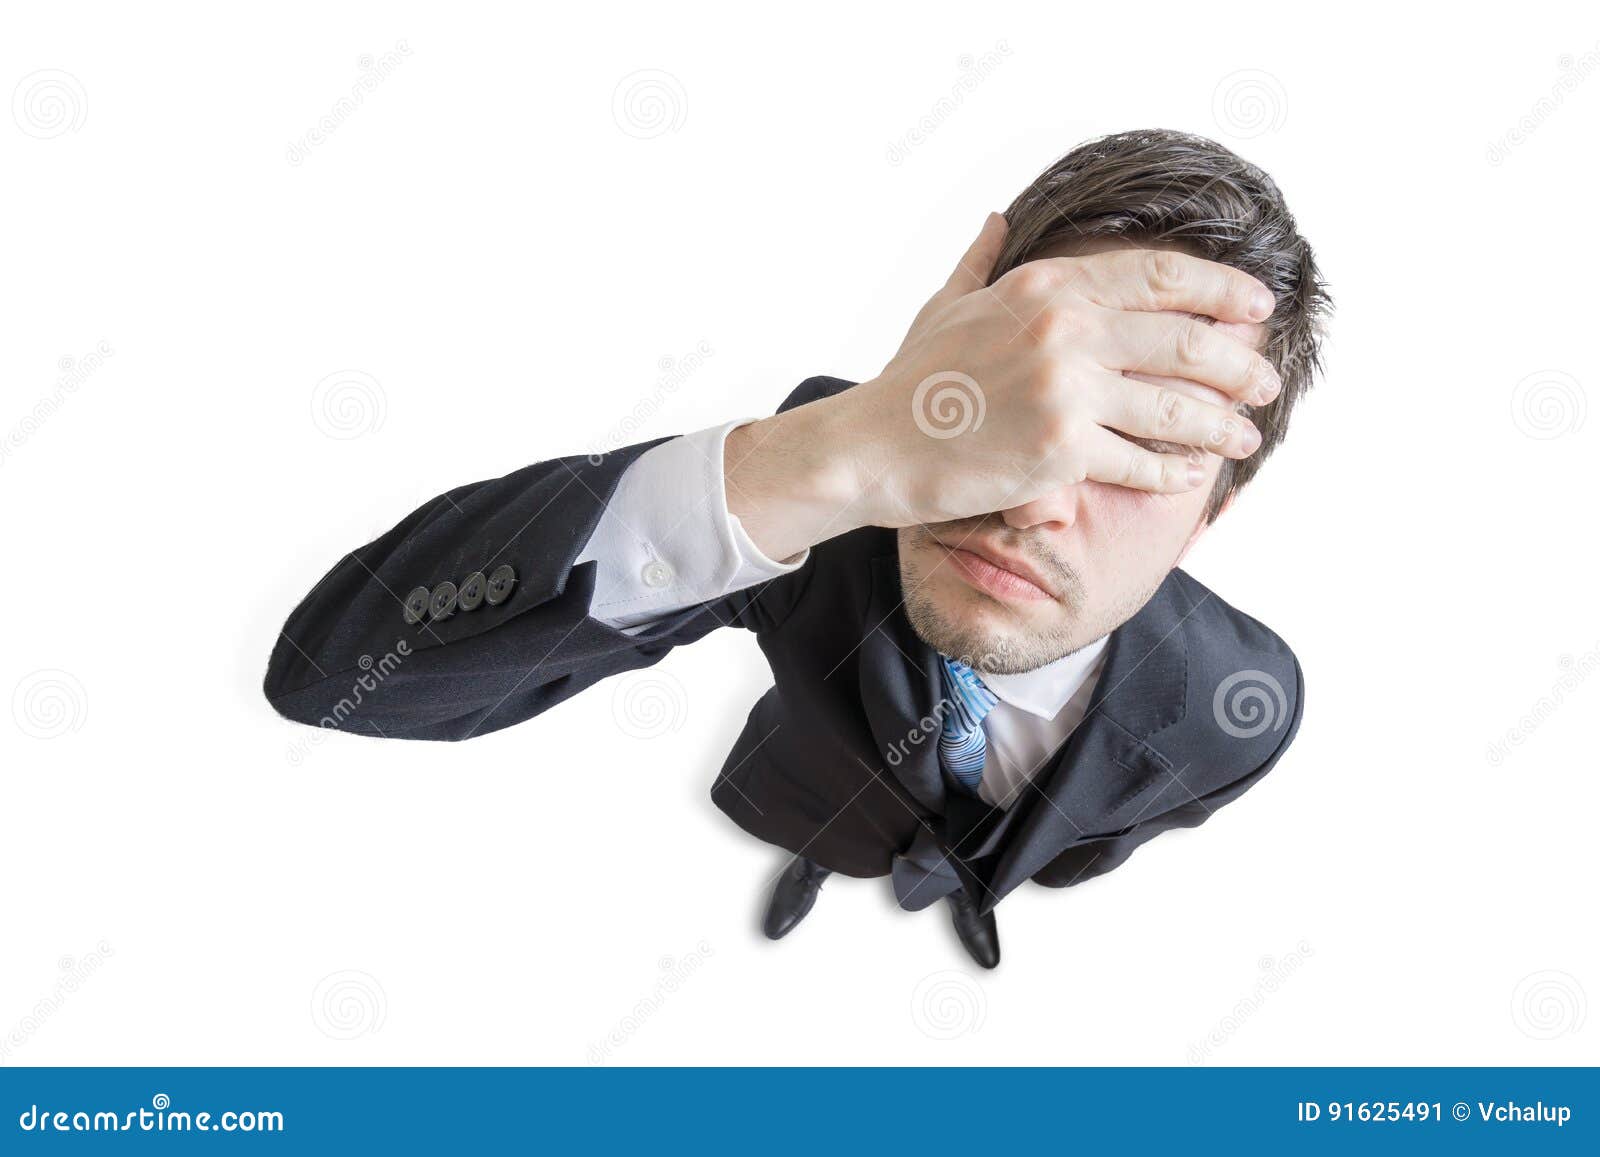 young unhappy and stressed man made mistake and is covering his face with hand.  on white background. view from top